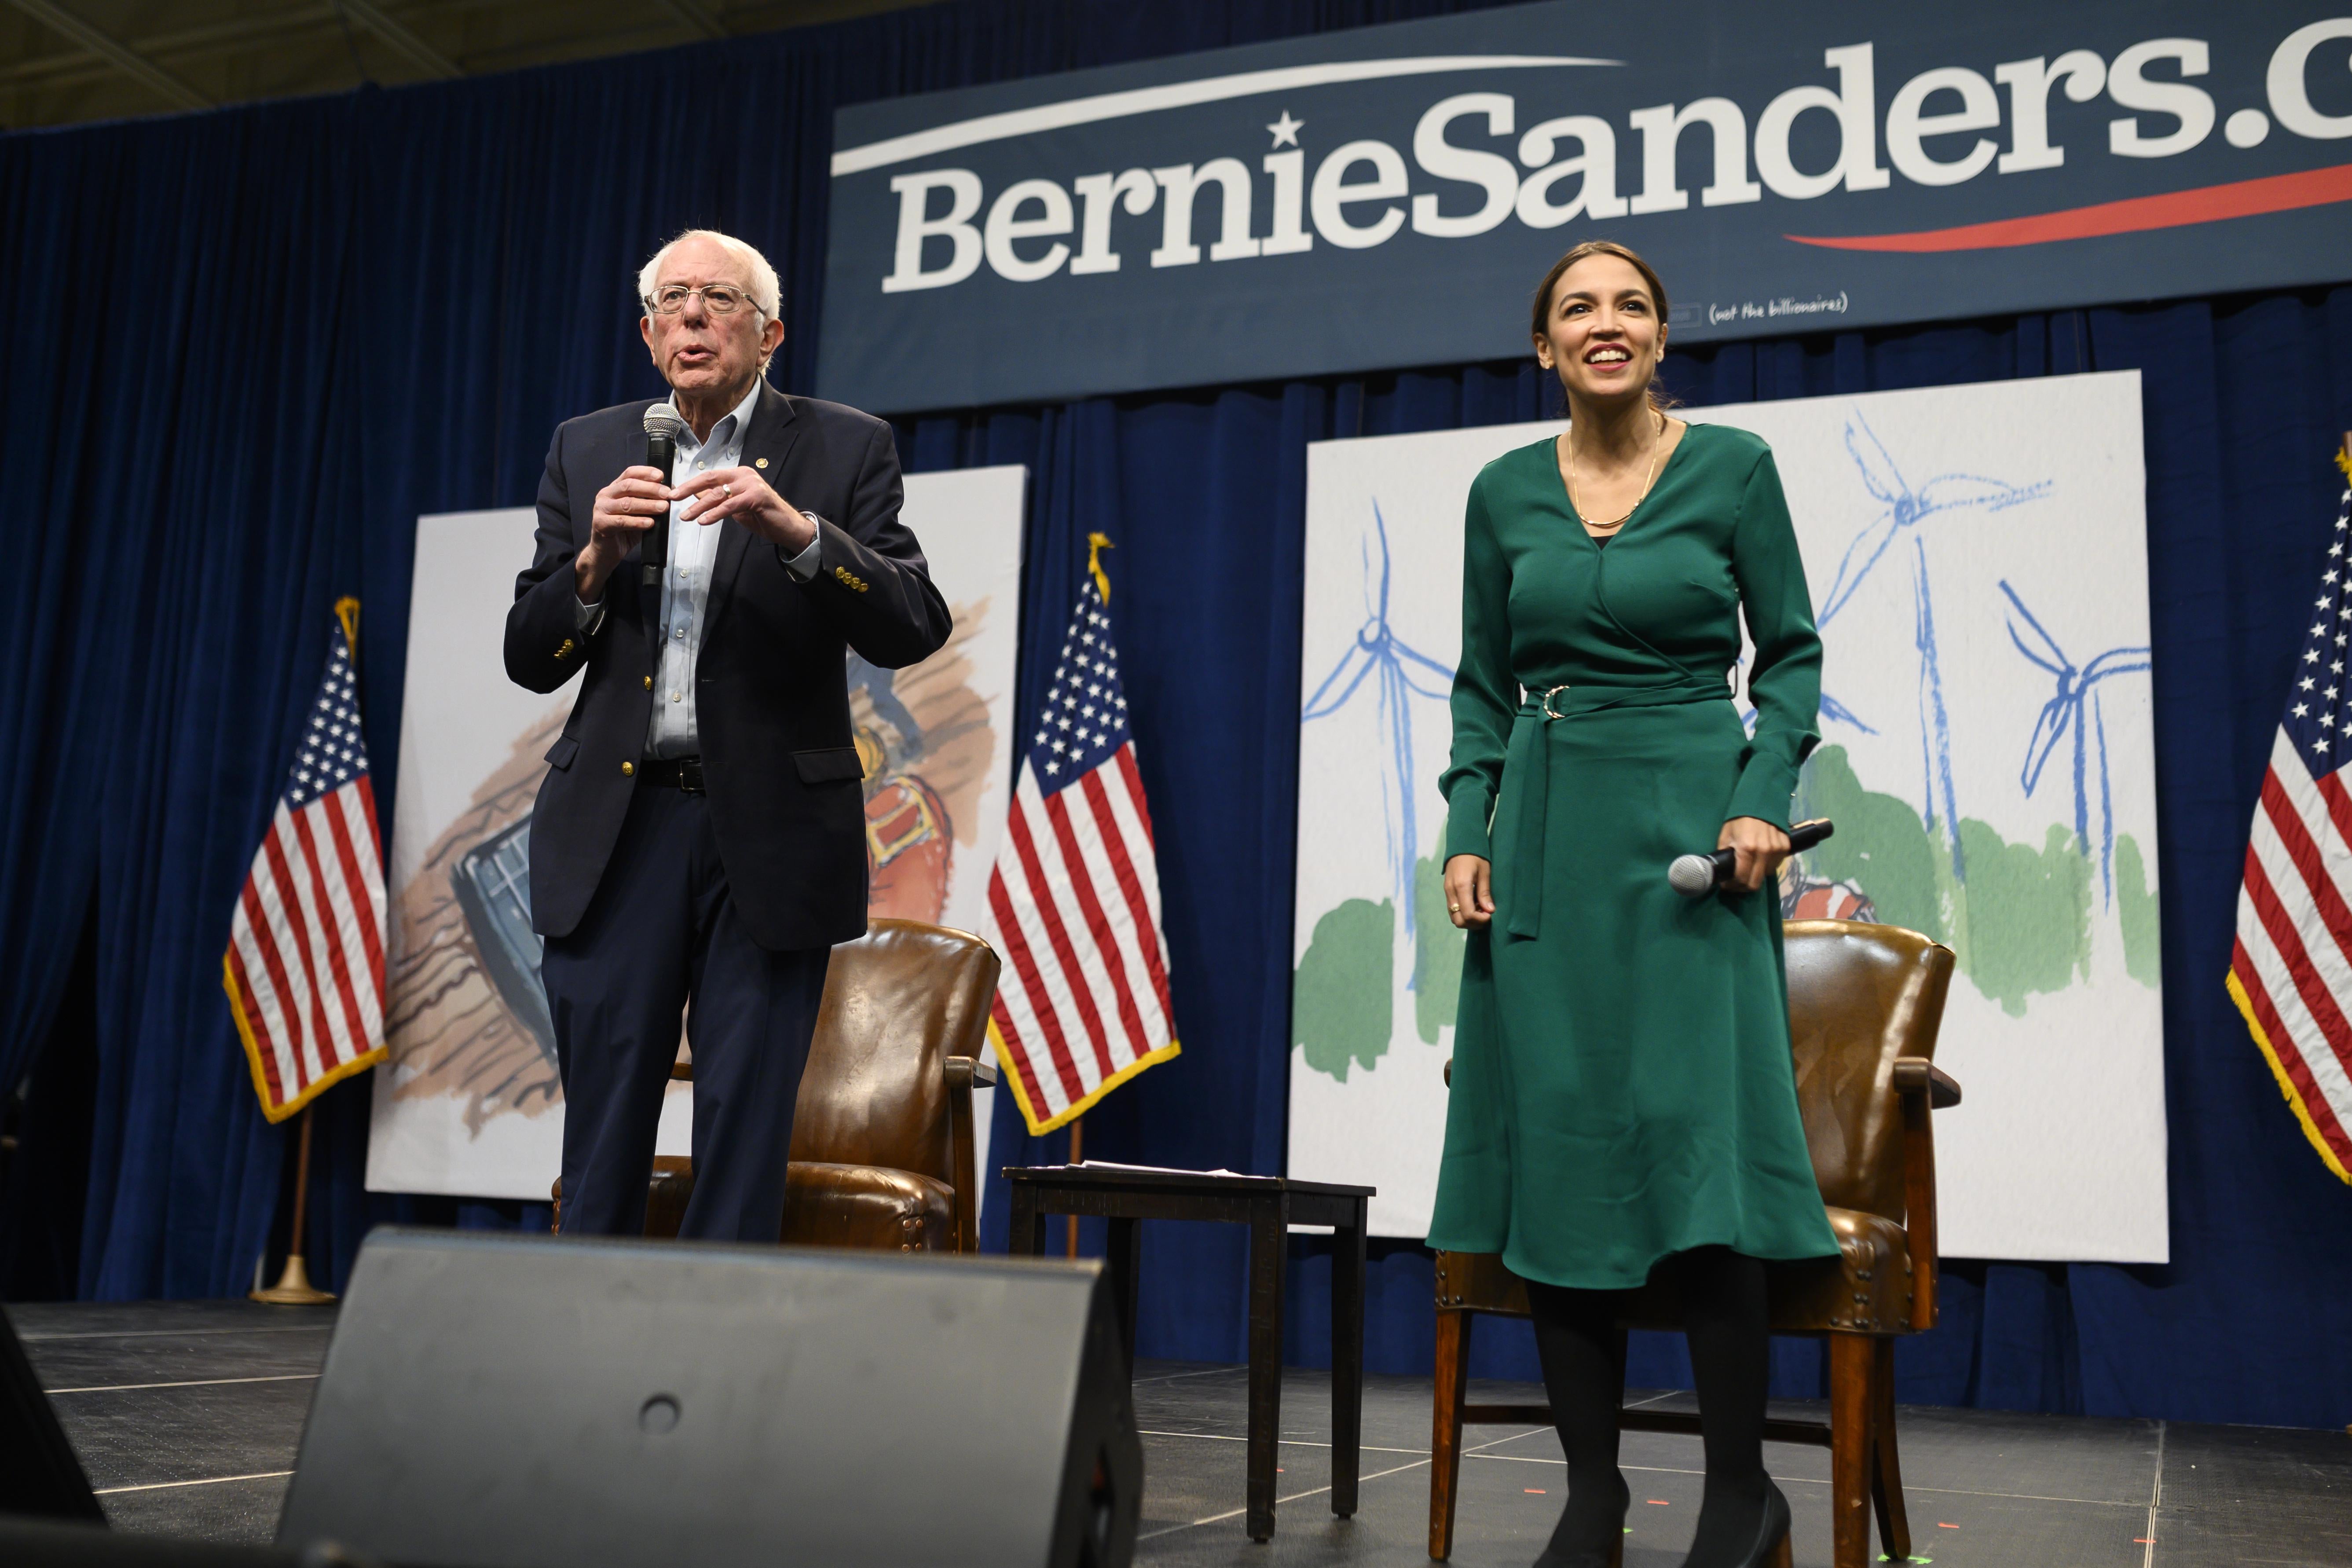 Democratic Presidential candidate Bernie Sanders and Rep. Alexandria Ocasio-Cortez field questions from audience members at the Climate Crisis Summit at Drake University on November 9, 2019 in Des Moines, Iowa.